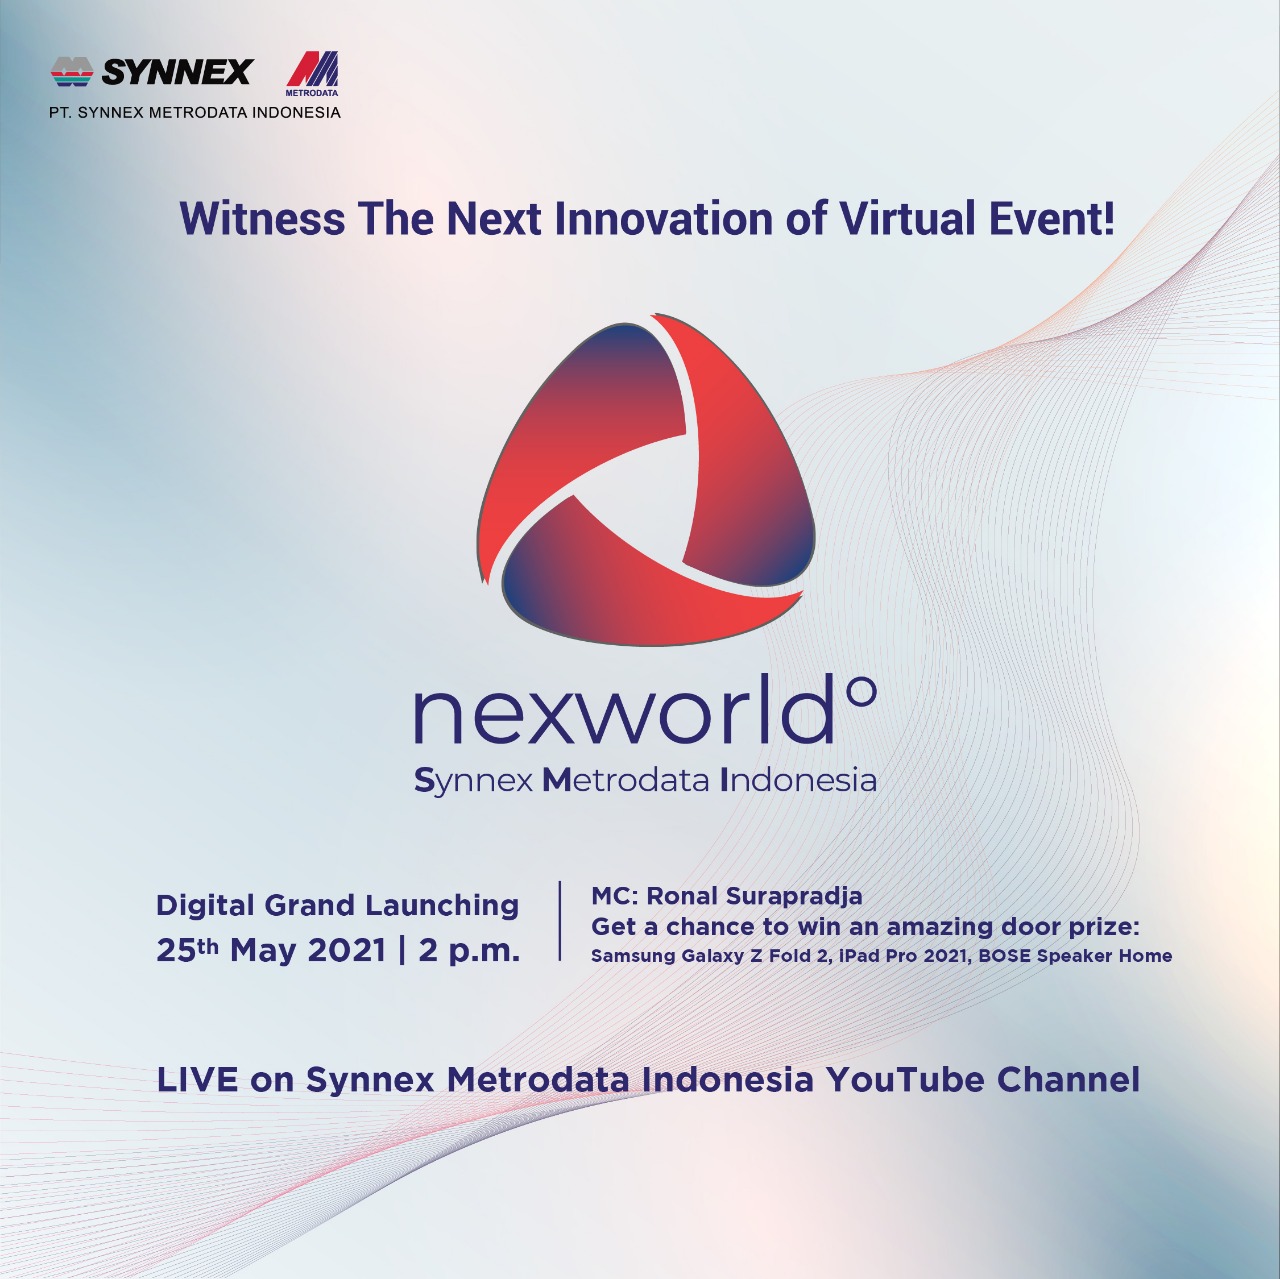 Grand Launching Nexworld Presented By Synnex Metrodata Indonesia - Synnex Metrodata Indonesia